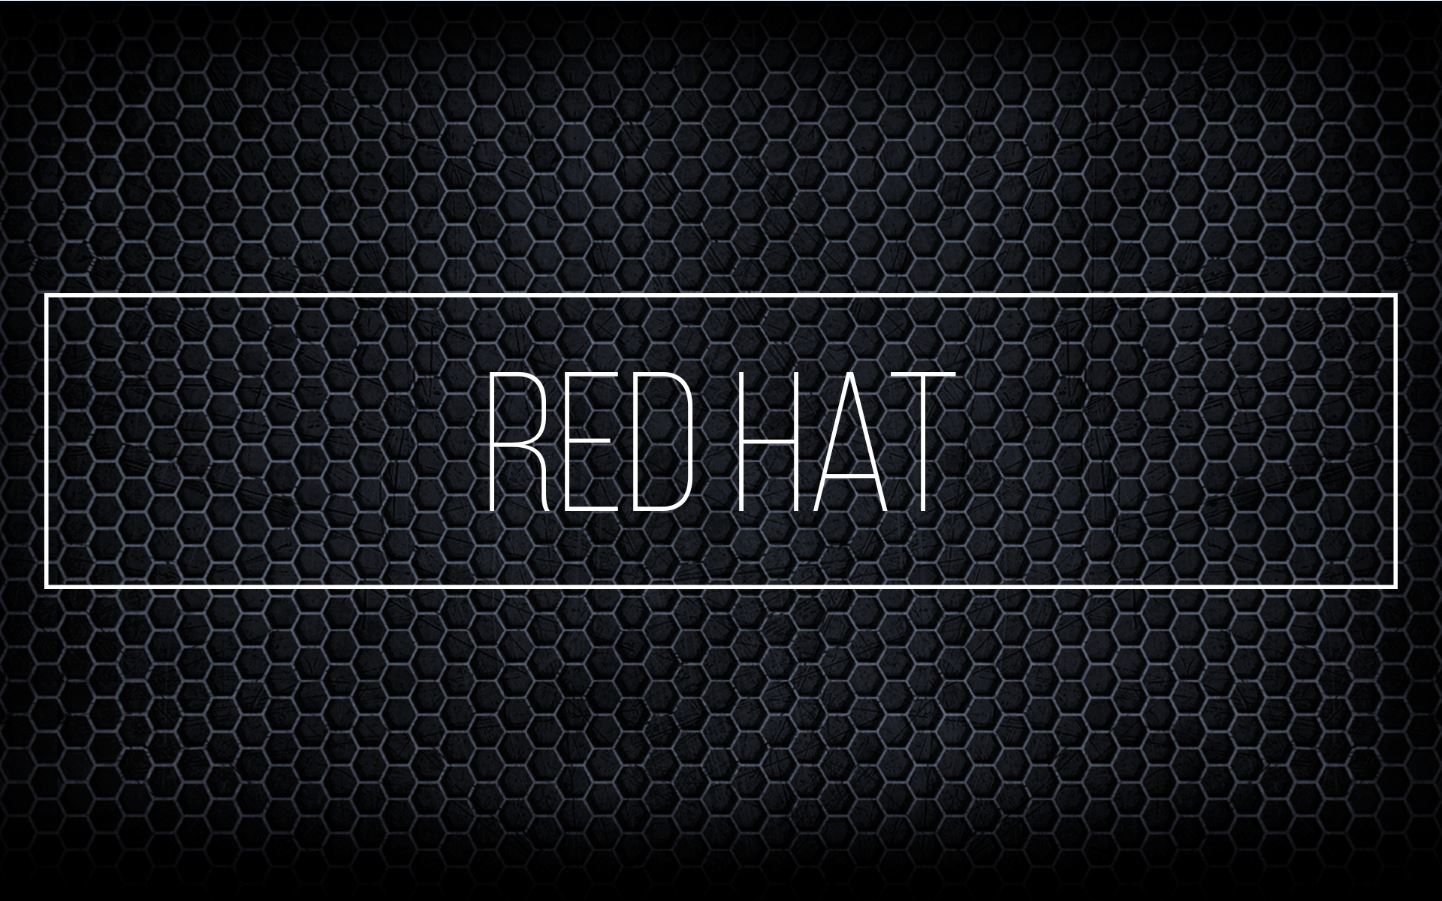 red-hat-1